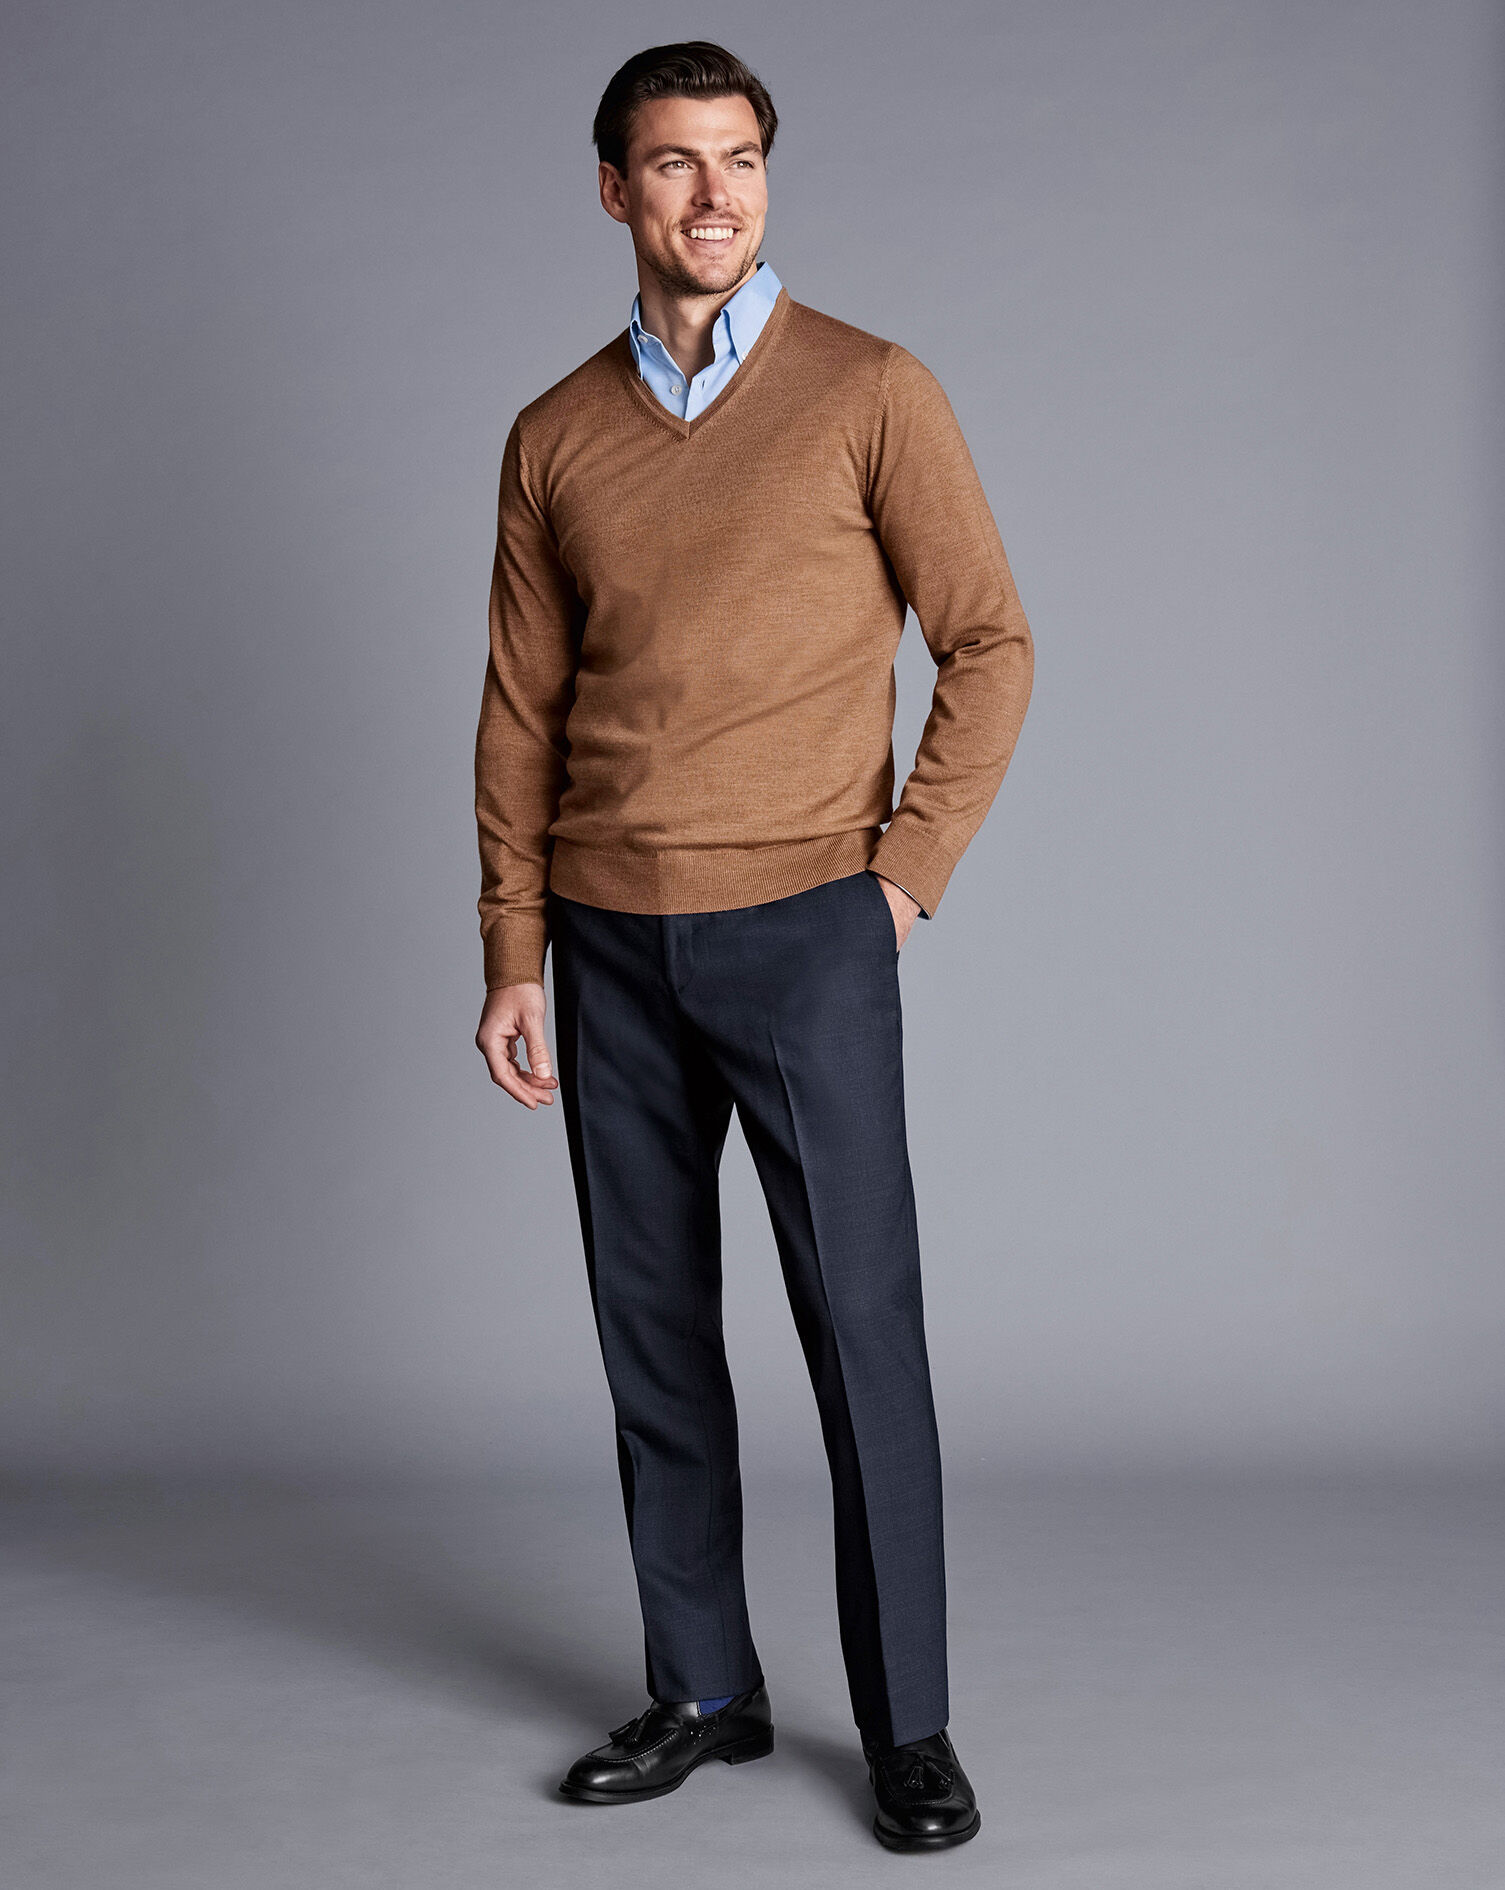 What Shirt Goes with Blue Pants? Unlocking the Perfect Combinations -  Antidote Store